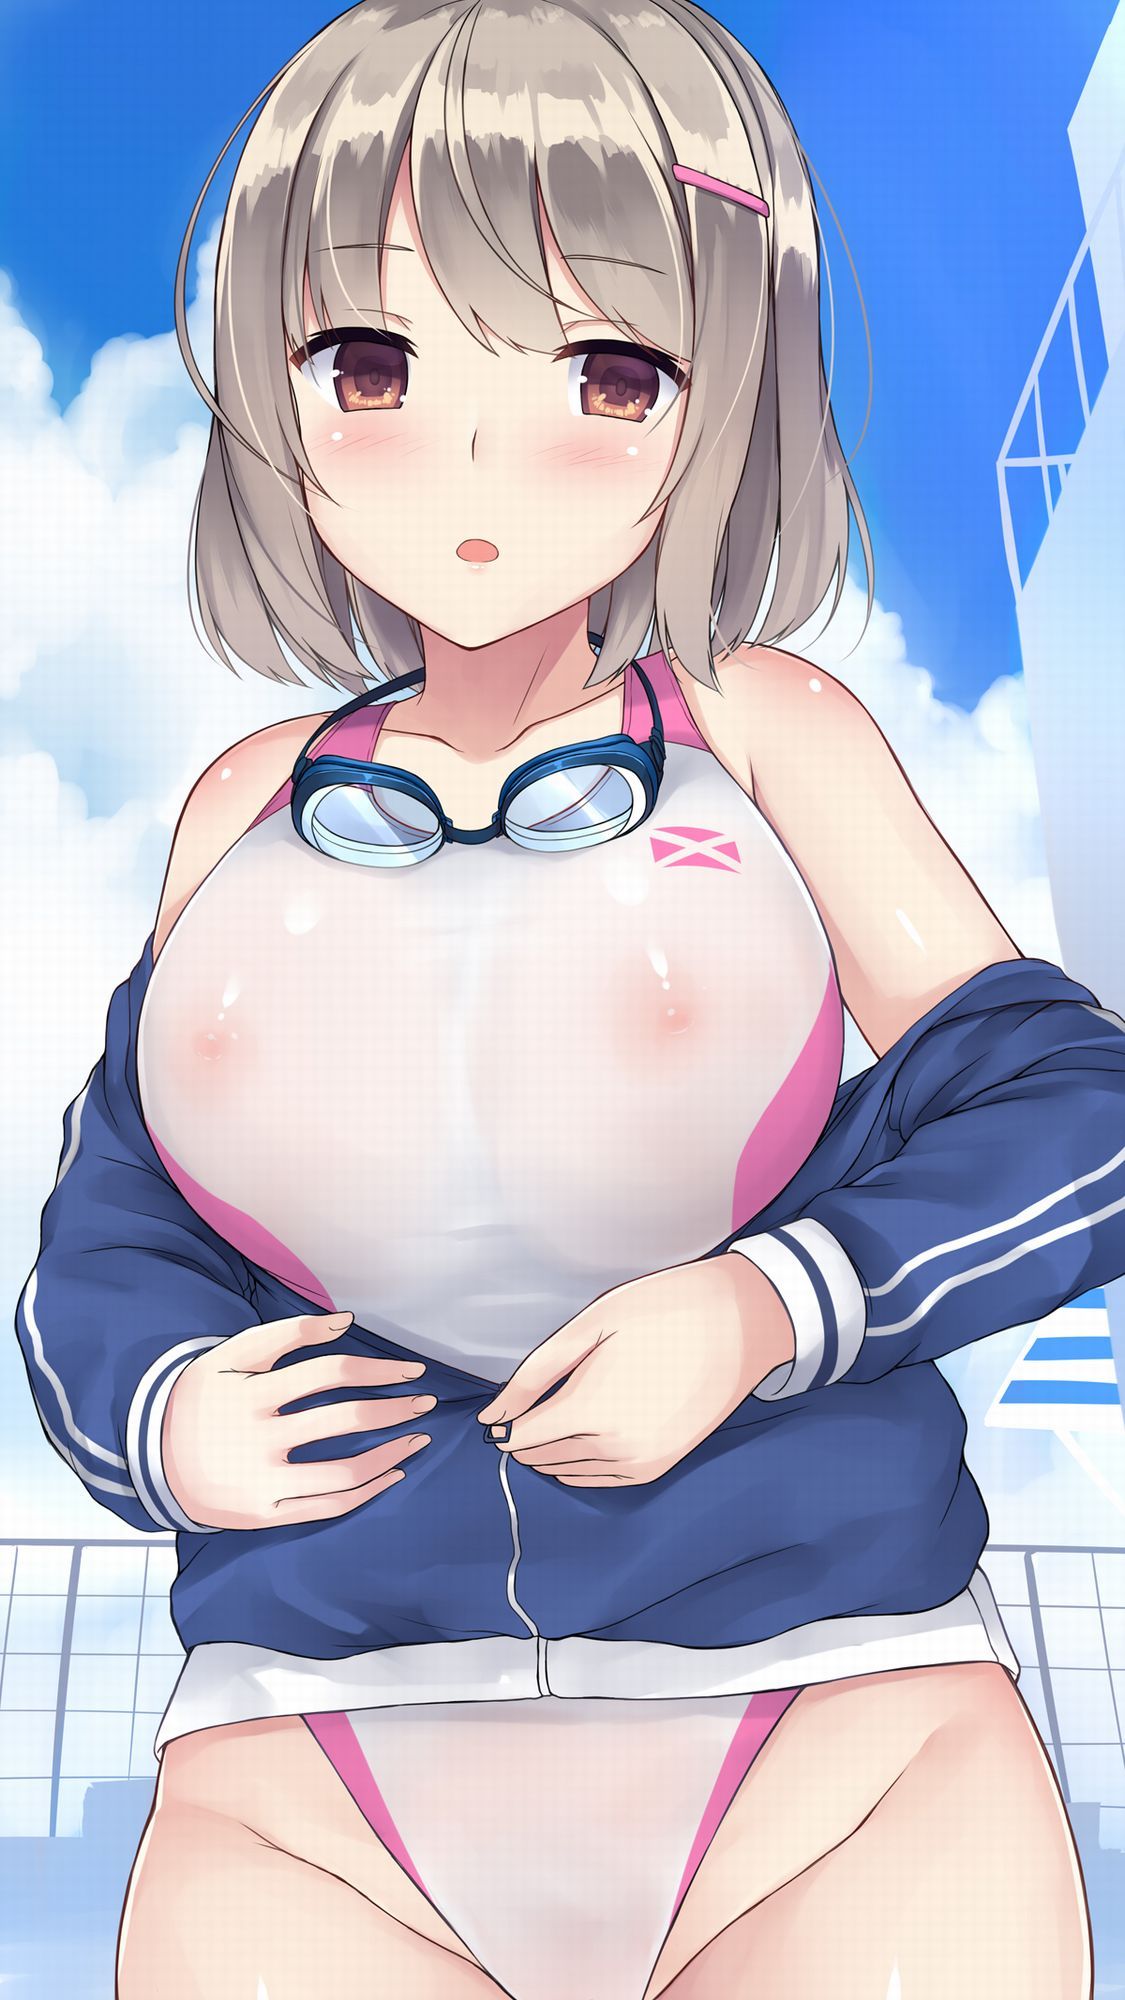 Erotic anime summary Lewd beautiful girls with small pink nipples in full view [secondary erotic] 19